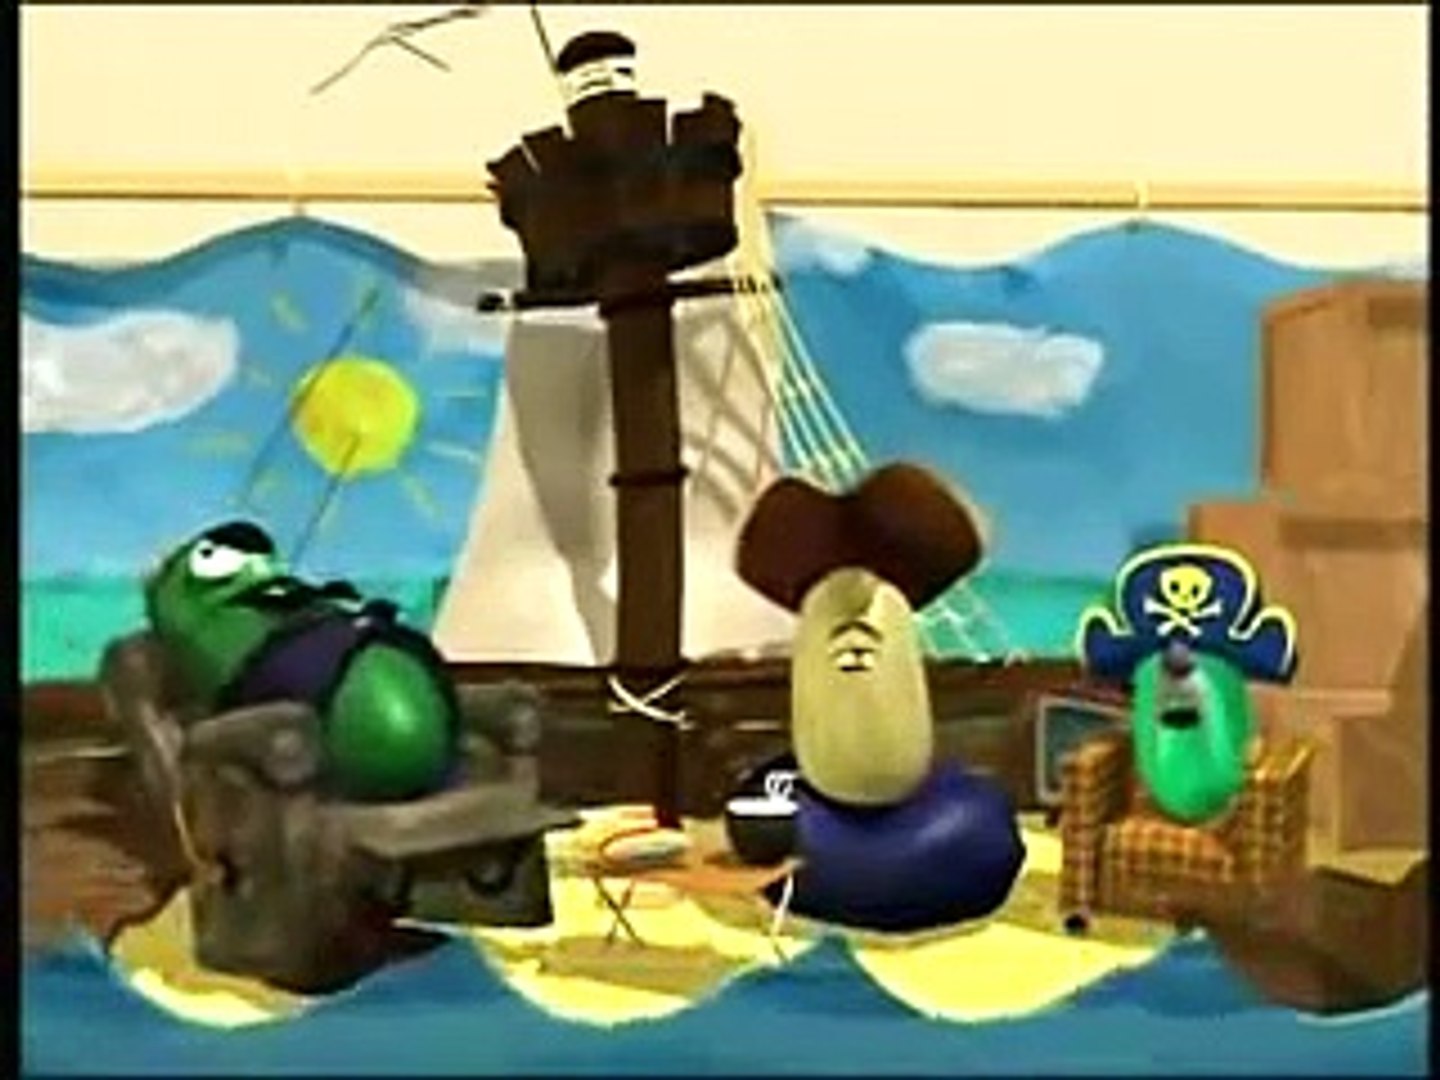 VeggieTales: The Pirates Who Don't Do Anything: Trailer 